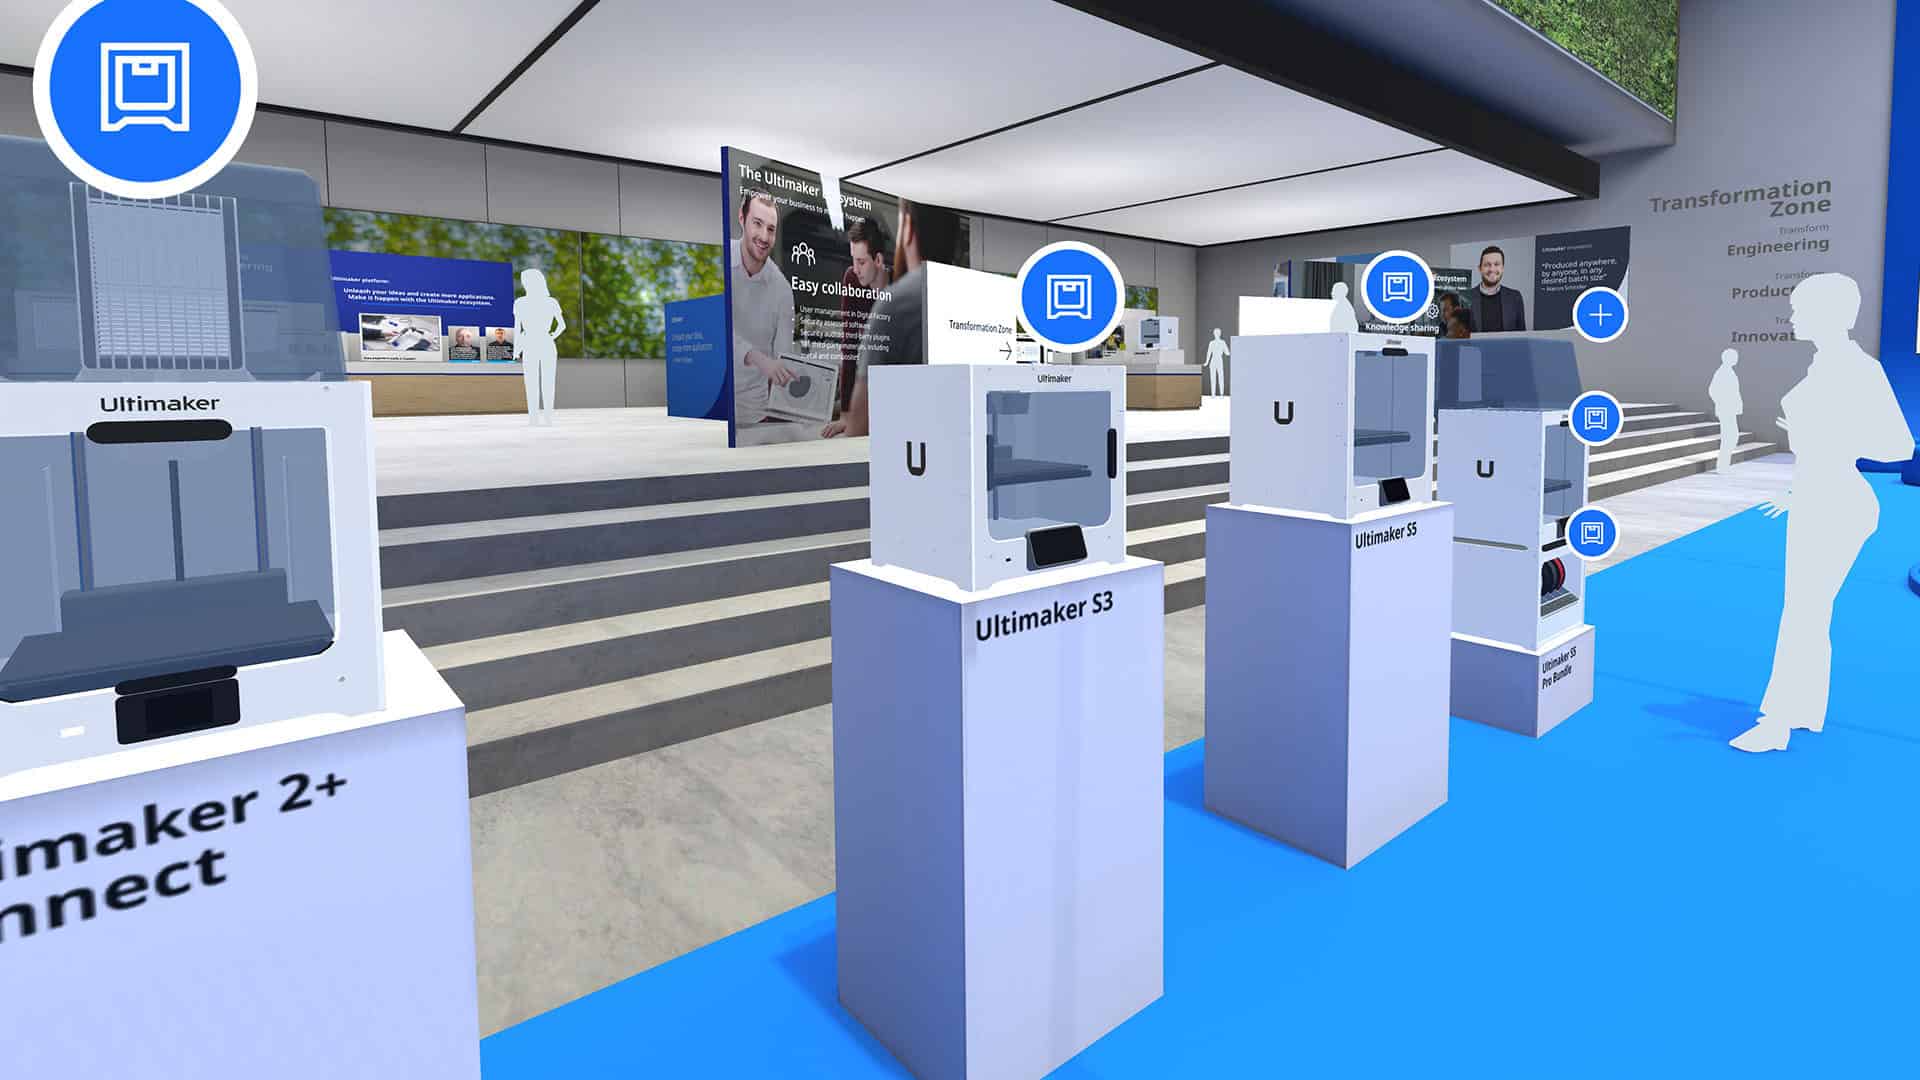 A snapshot from inside the Ultimaker virtual showroom which has 3D products on podiums.